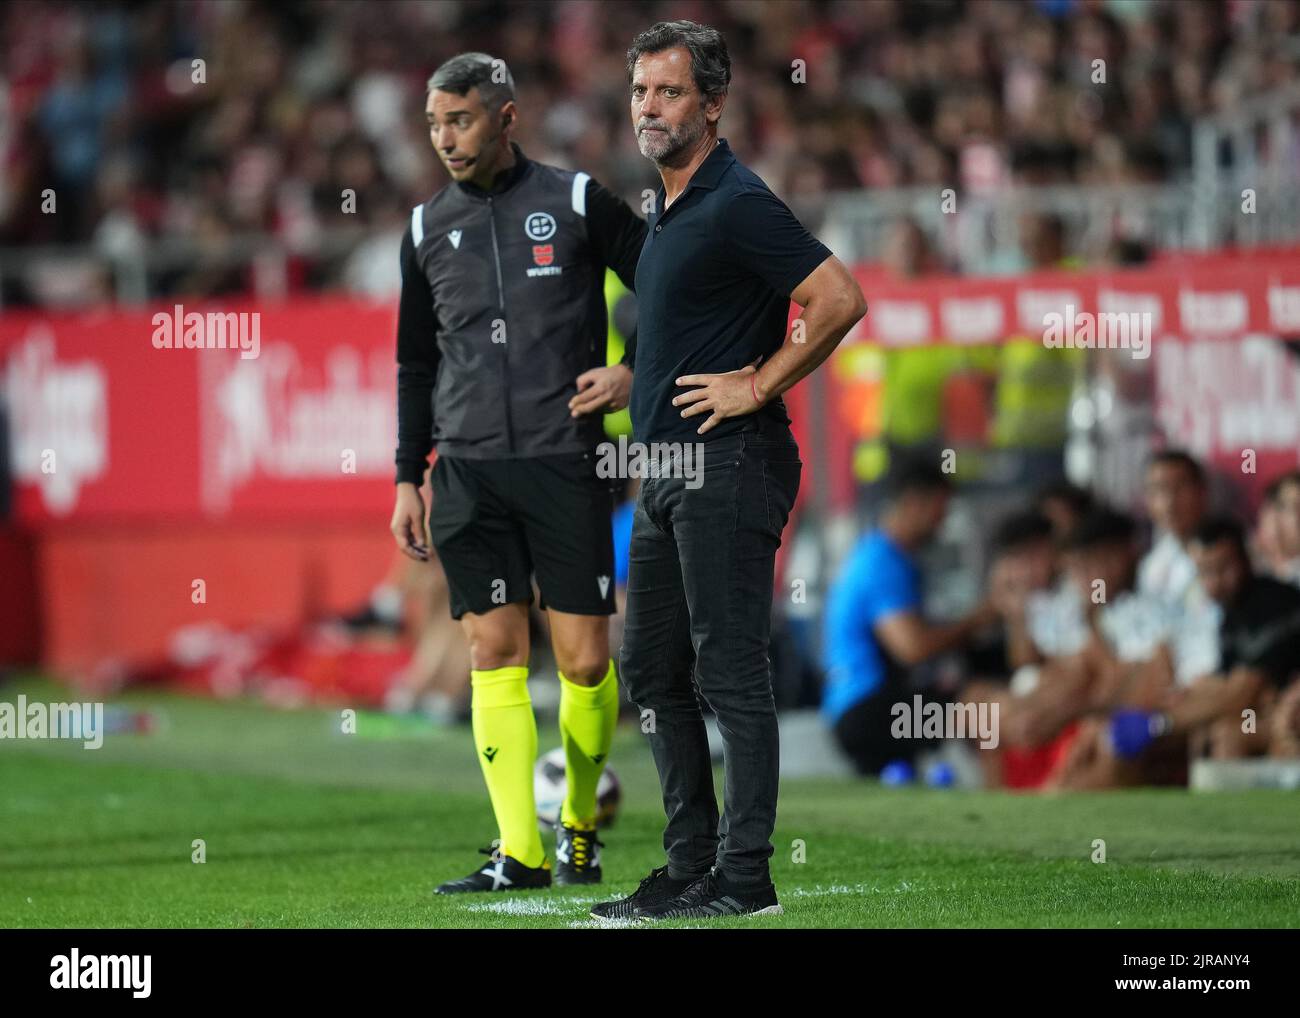 Getafe CF head coach Quique Sanchez Flores during the La Liga match between Girona FC and Getafe CF played at Montilivi Stadium on August 22, 2022 in Girona, Spain. (Photo by Colas Buera / PRESSINPHOTO) Stock Photo